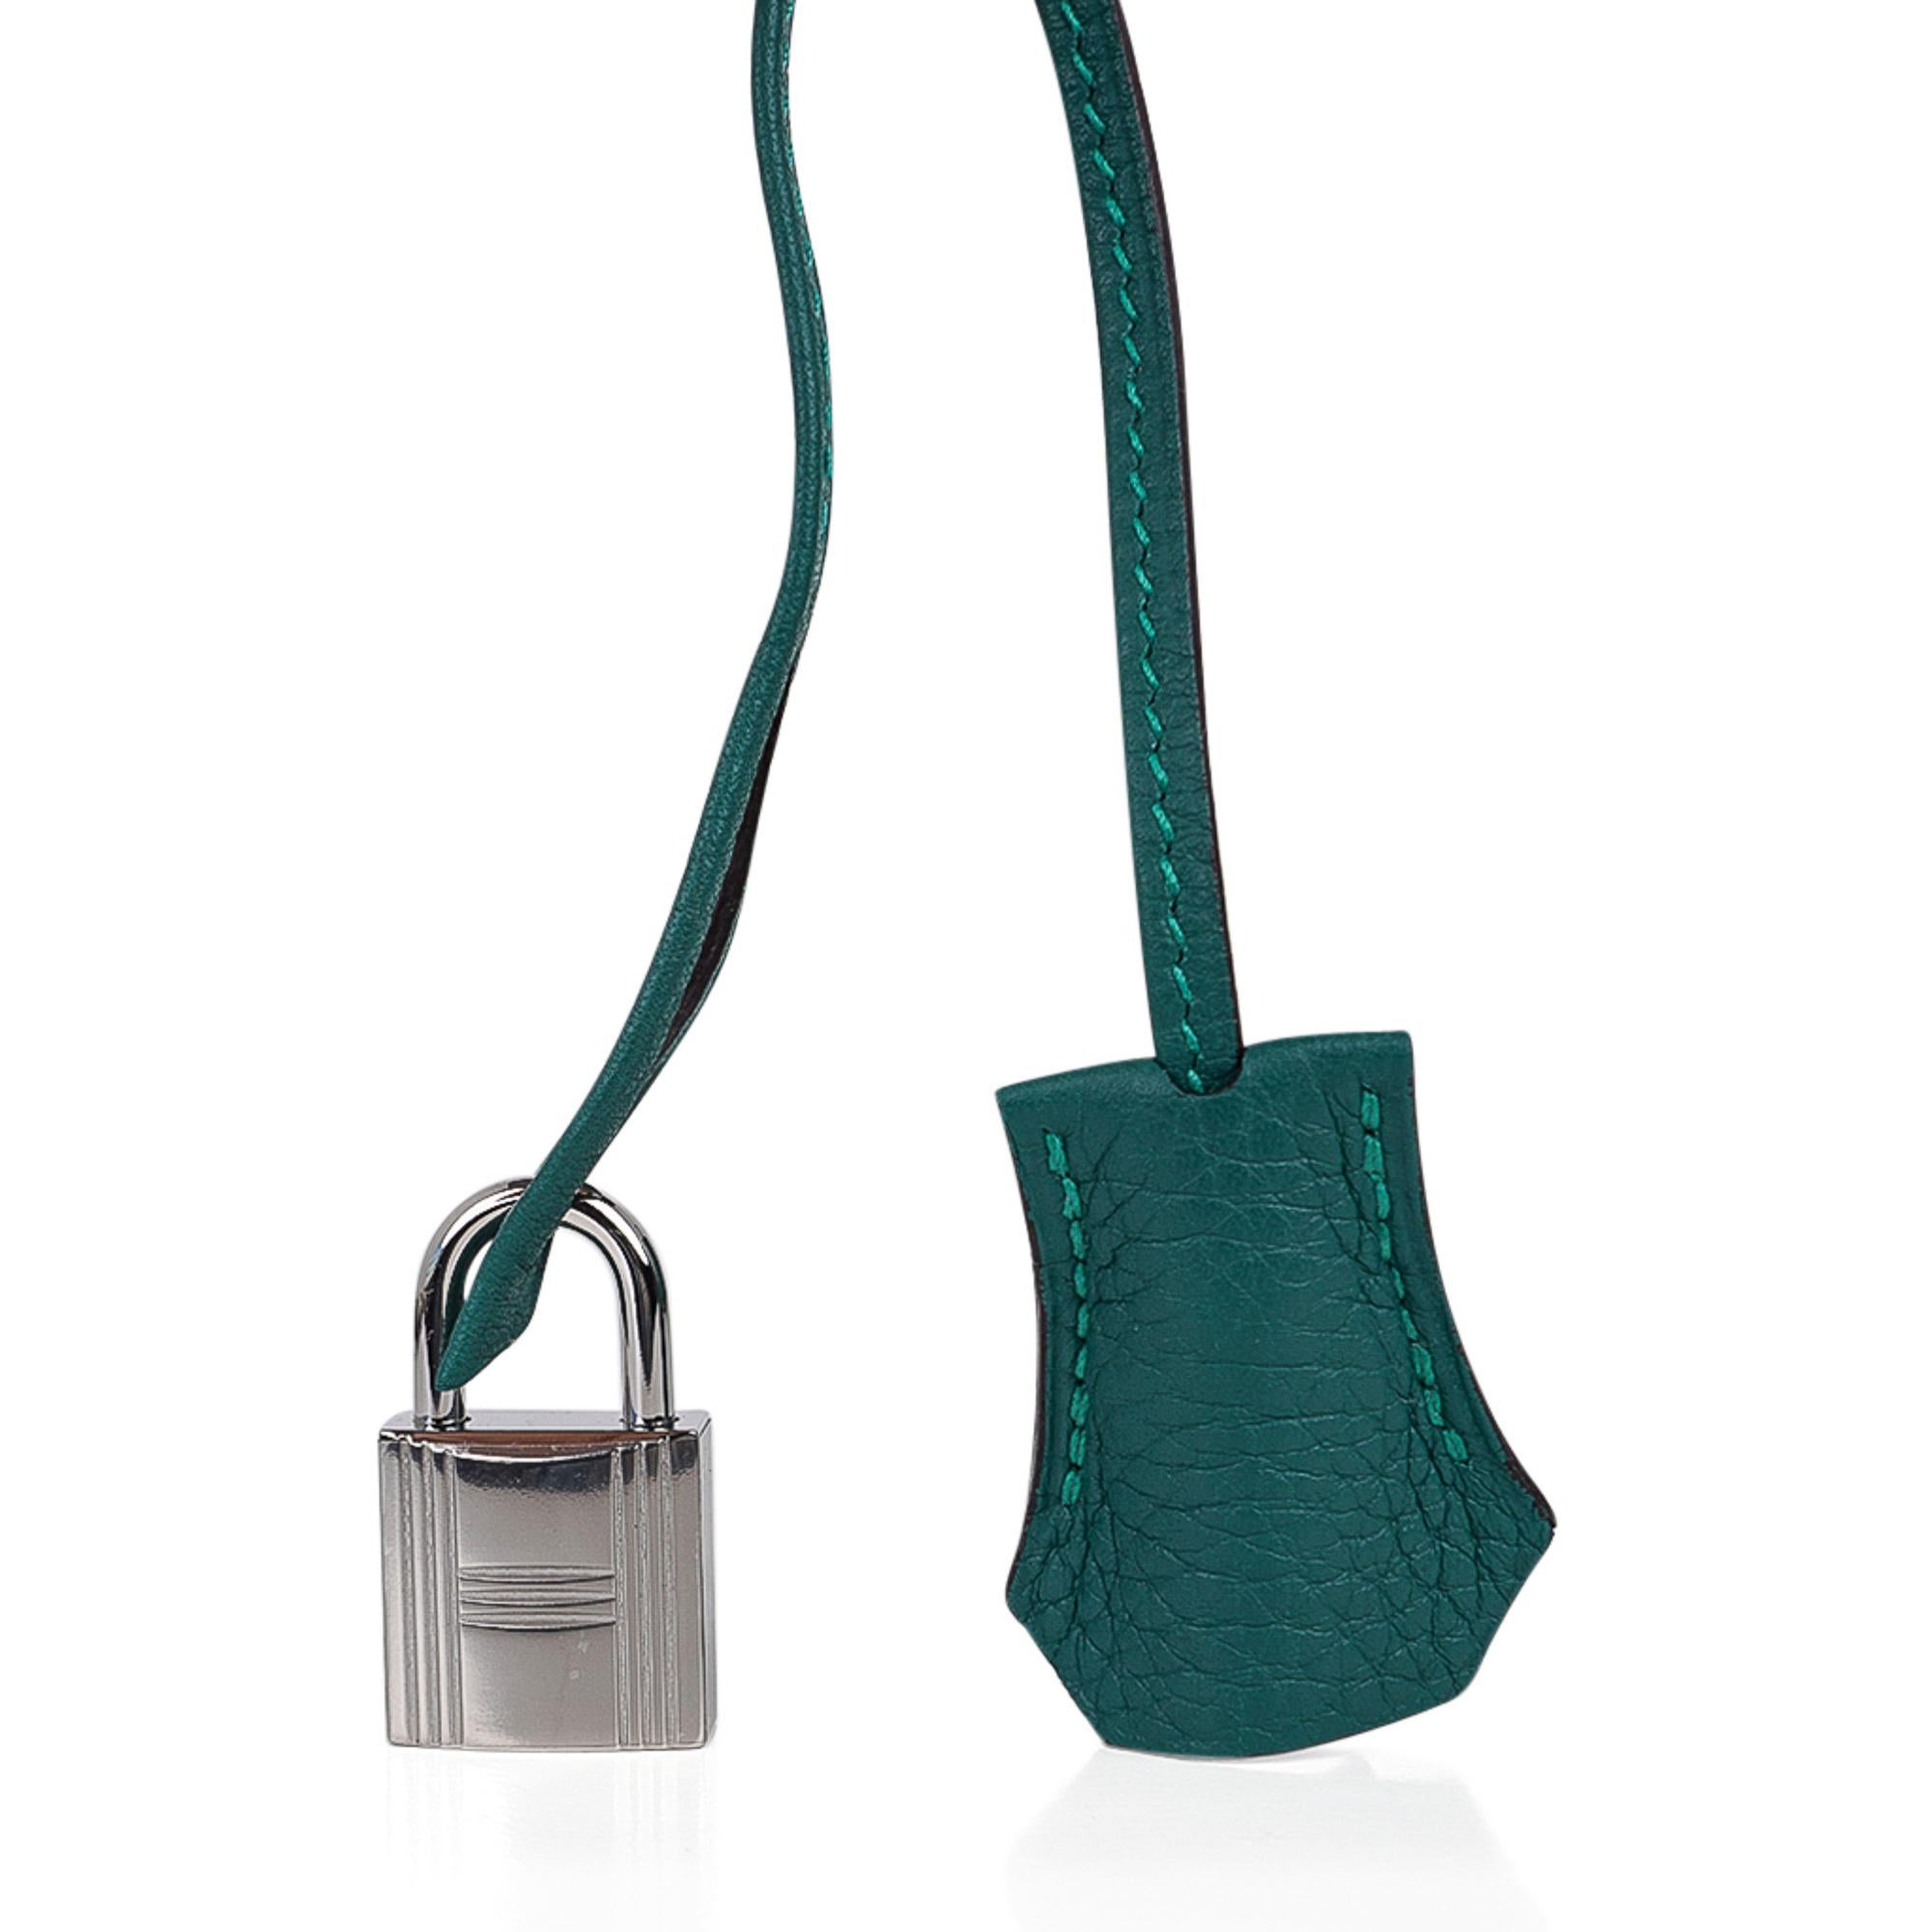 Mightychic offers an Hermes 30 Birkin bag features strikingly beautiful Malachite exotic green.
Clemence leather.
Fresh palladium hardware. 
Perfect day to dinner size!
NEW or NEVER WORN. 
Comes with lock, keys, clochette, sleeper, raincoat and